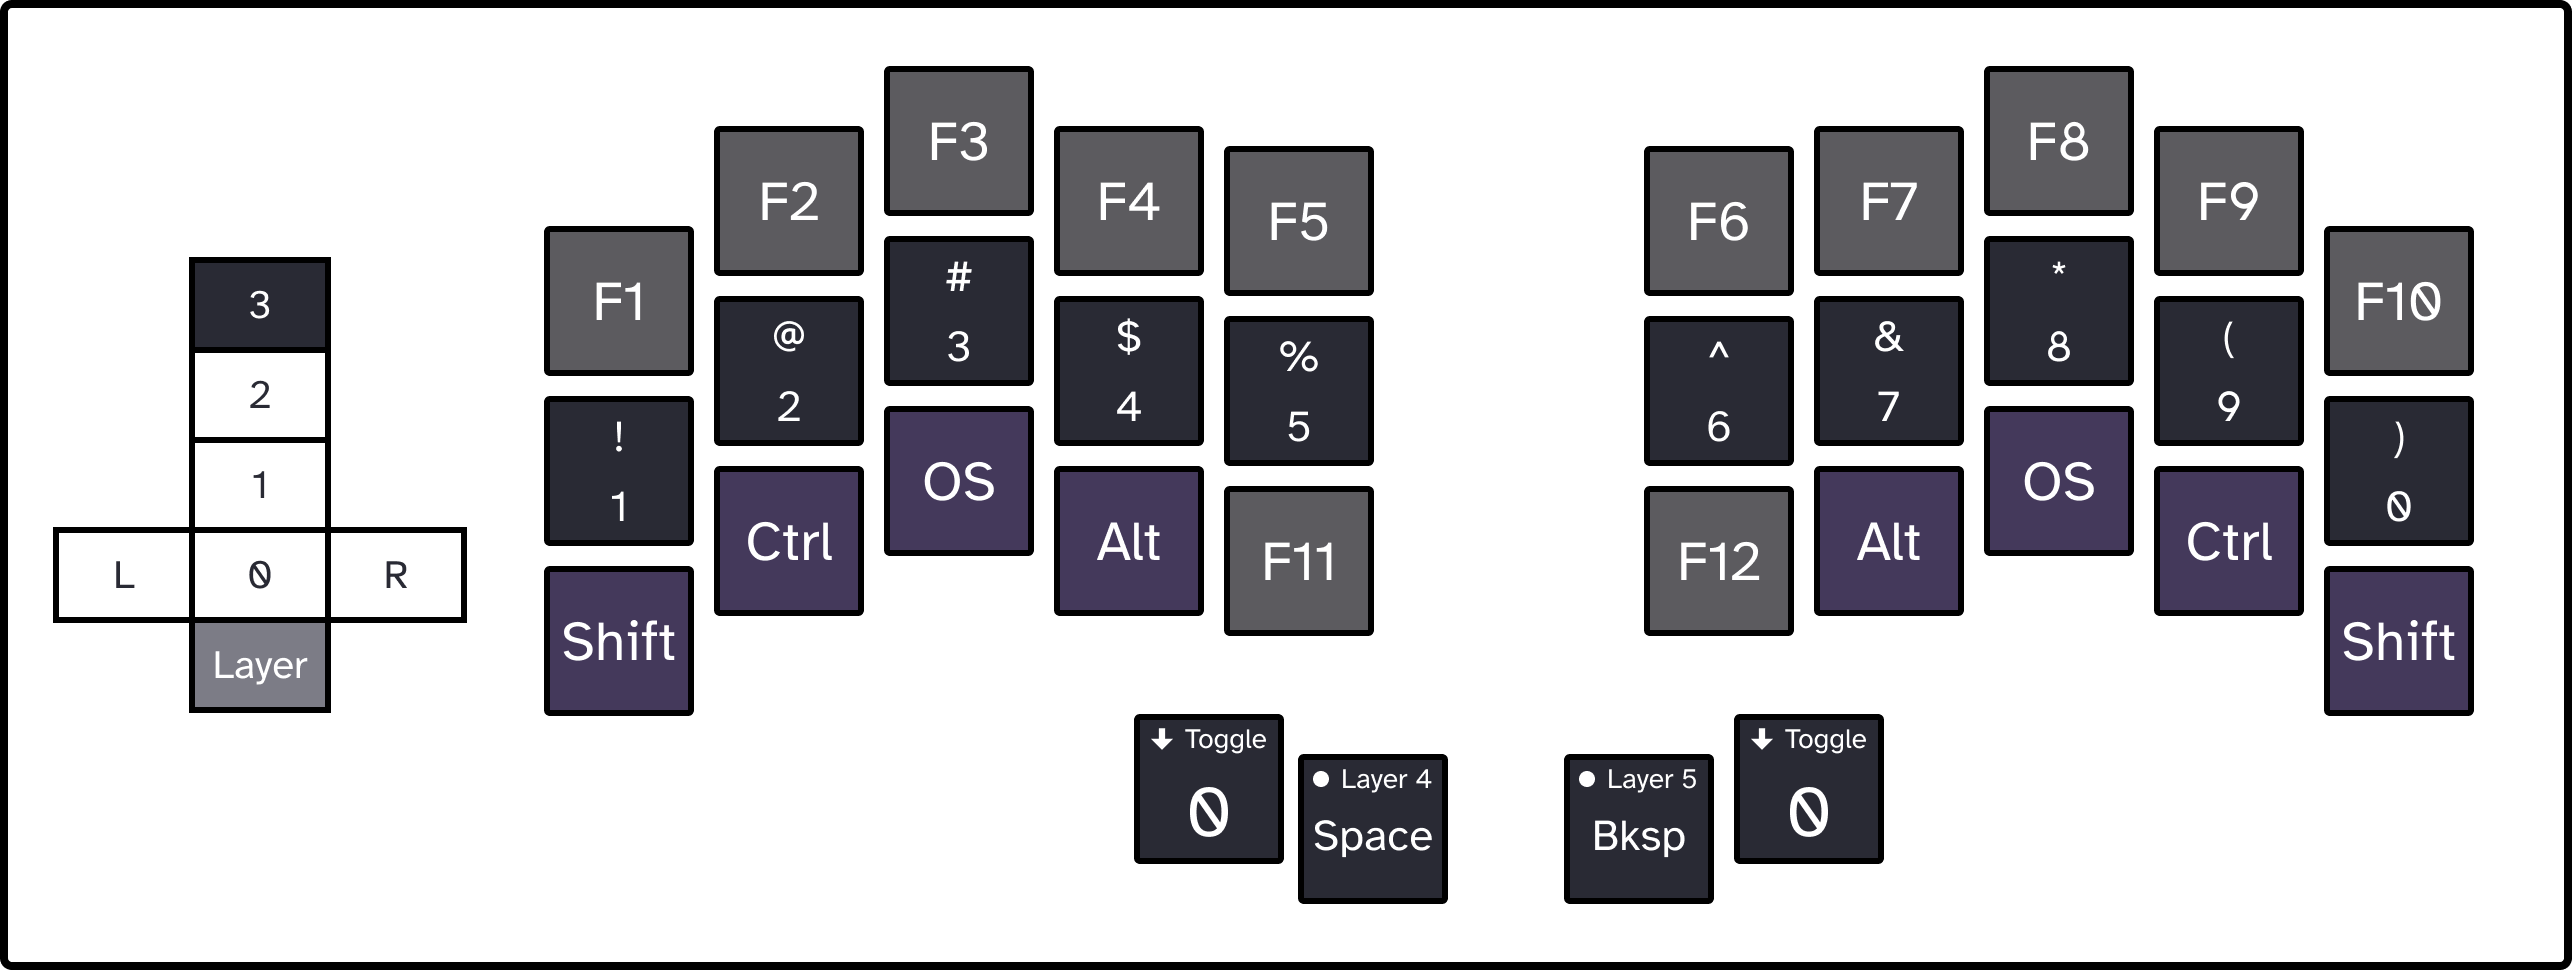 Layer 3 of my new keyboard layout for the Ferris Sweep. Keys from left to right, going down each finger from top to bottom. Left pinky: F1, Number 1, Shift. Left ring: F2, Number 2, Control. Left middle: F3, Number 3, OS. Left index first column: F4, Number 4, Alt. Left index second column: F5, Number 5, F11. Left thumb 1: Space. Left thumb 2: Toggle Layer 0. Right thumb 1: Backspace. Right thumb 2: toggle Layer 0. Right index 2: F6, Number 6, F12. Right index 1: F7 Number 7, Alt. Right middle: F8, Number 8, OS. Right ring: F9, Number 9, Control. Right pinky: F10, Number 0, Shift.